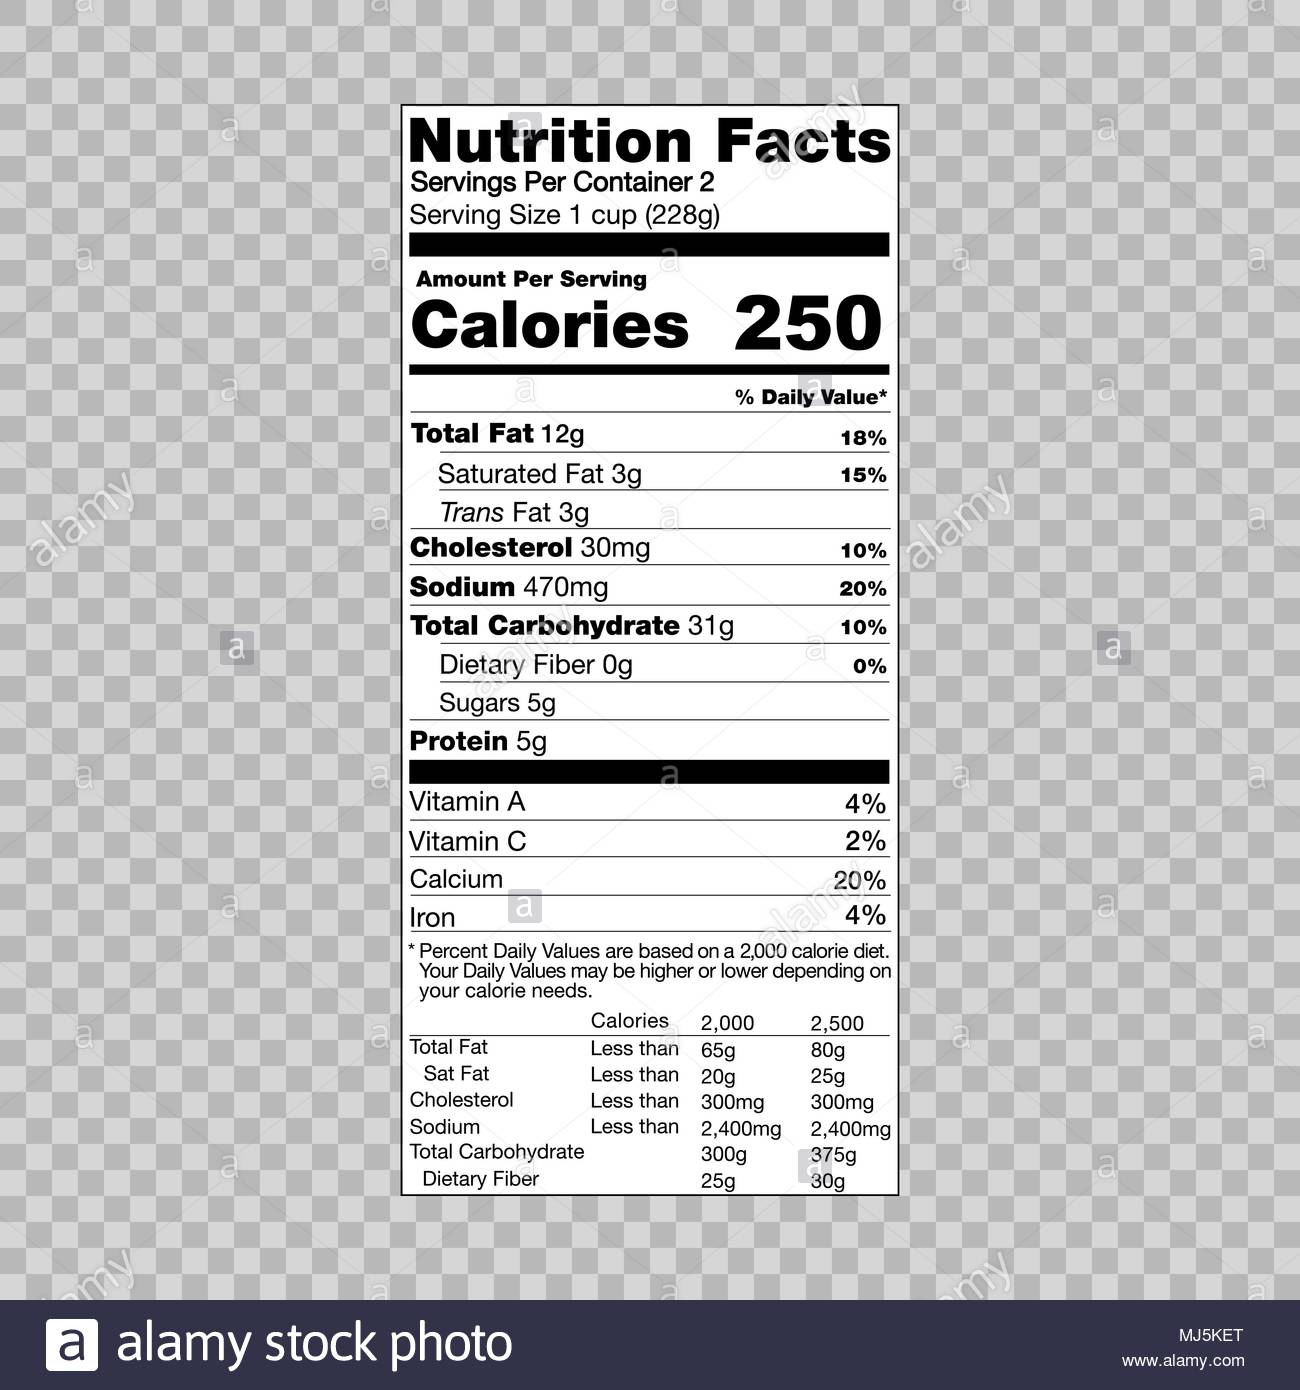 Nutrition Facts Information Template For Food Label Stock For Blank Food Label Template